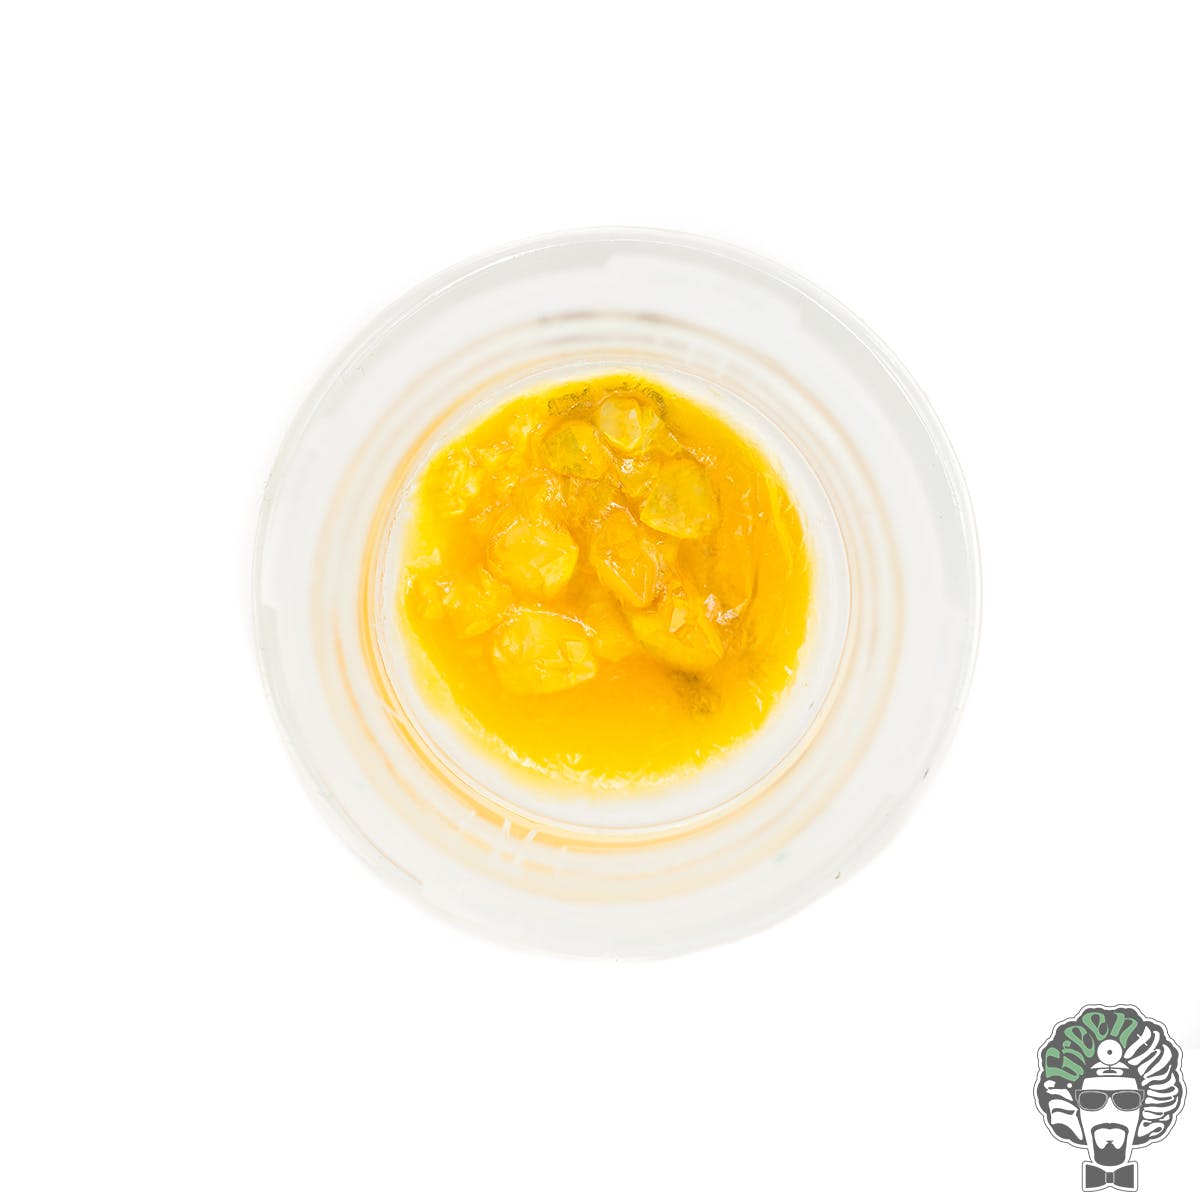 wax-the-hive-king-size-cookies-frosty-x-the-hive